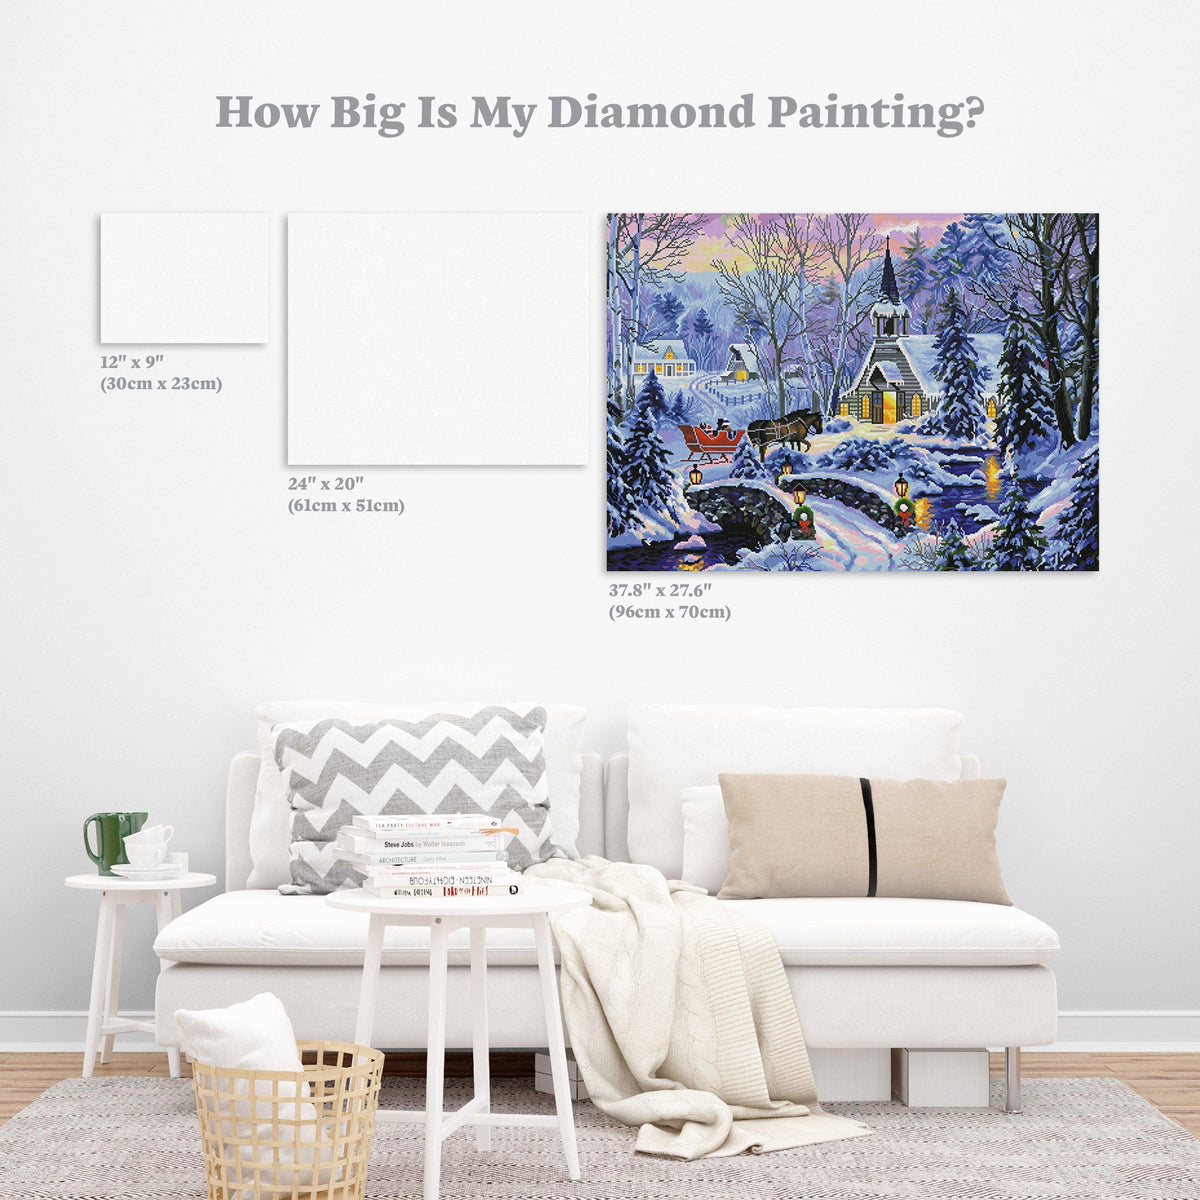 Diamond Painting Cozy Evening 37.8" x 27.6″ (96cm x 70cm) / Square with 56 Colors including 2 ABs / 105,534